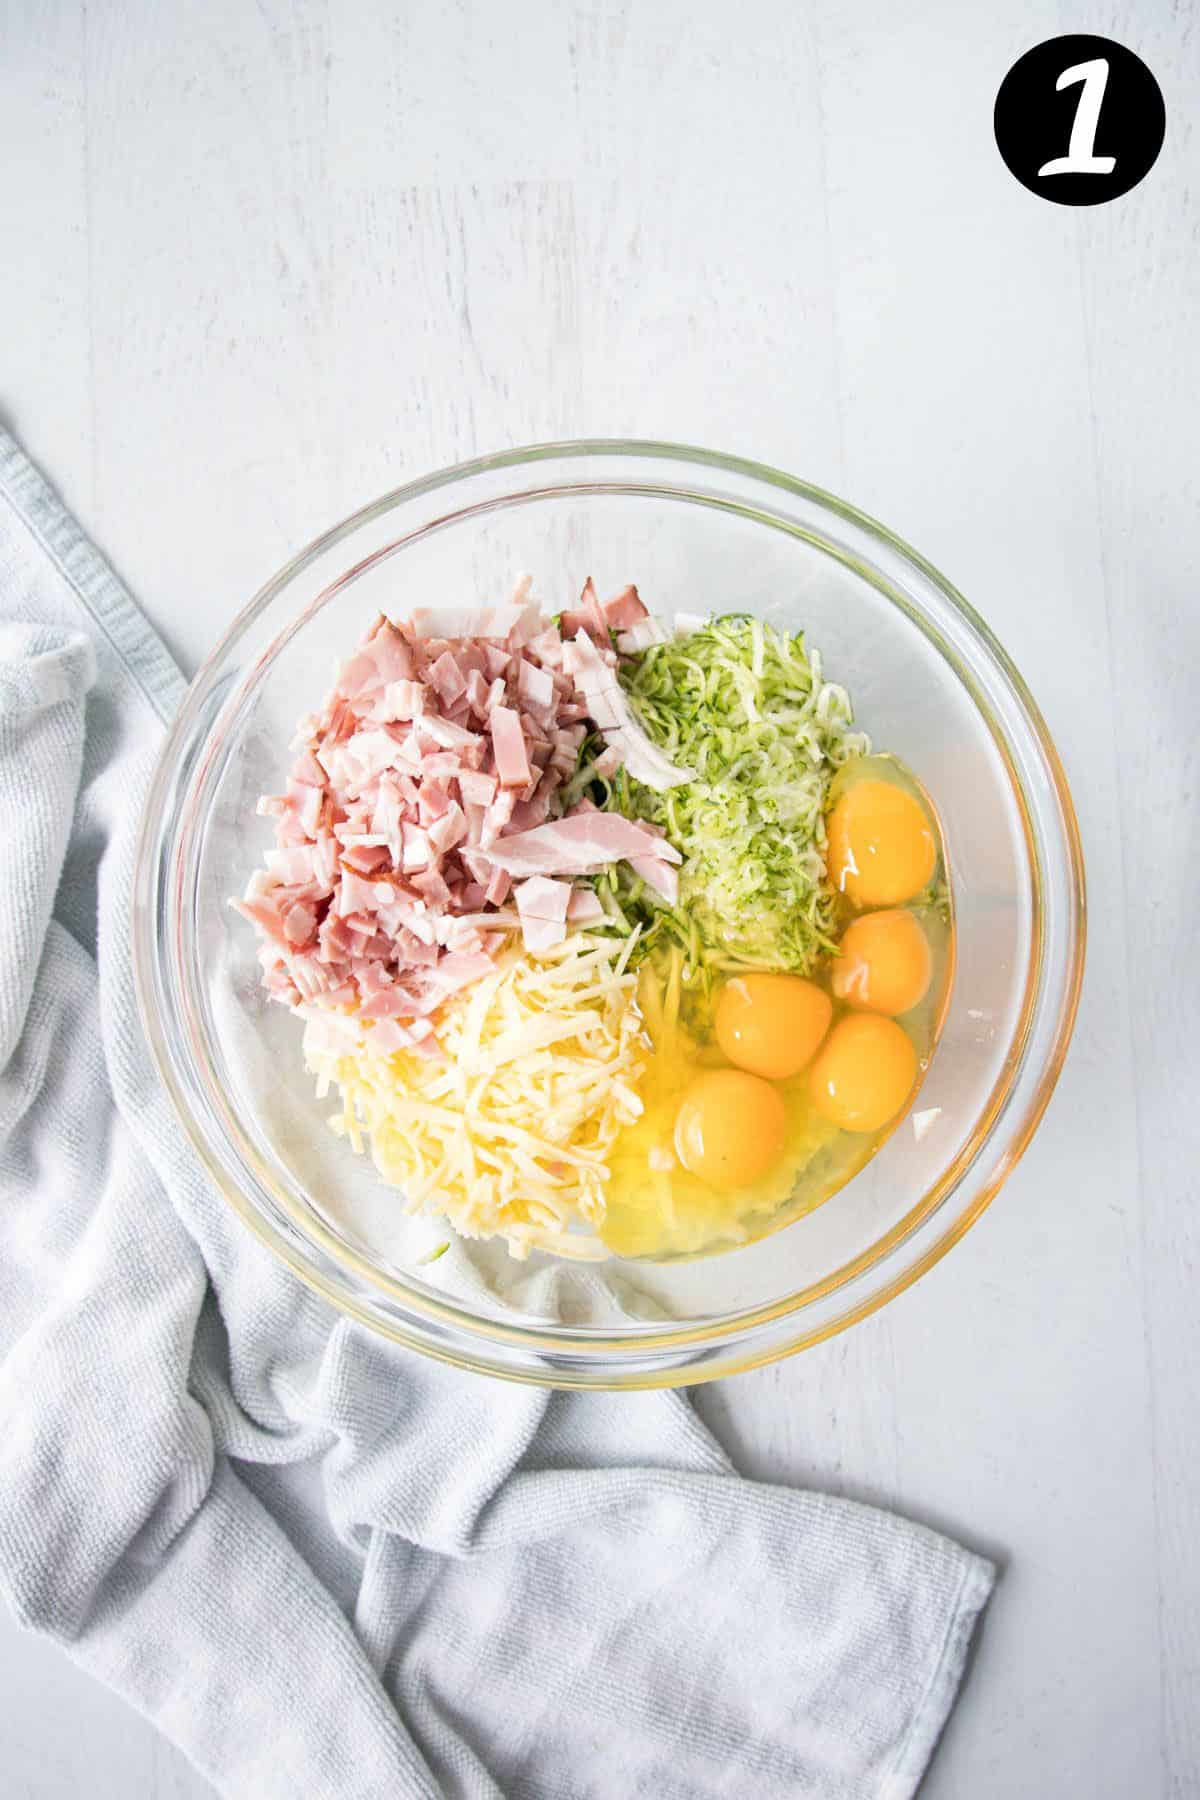 grated zucchini, bacon and eggs in a bowl with other ingredients.